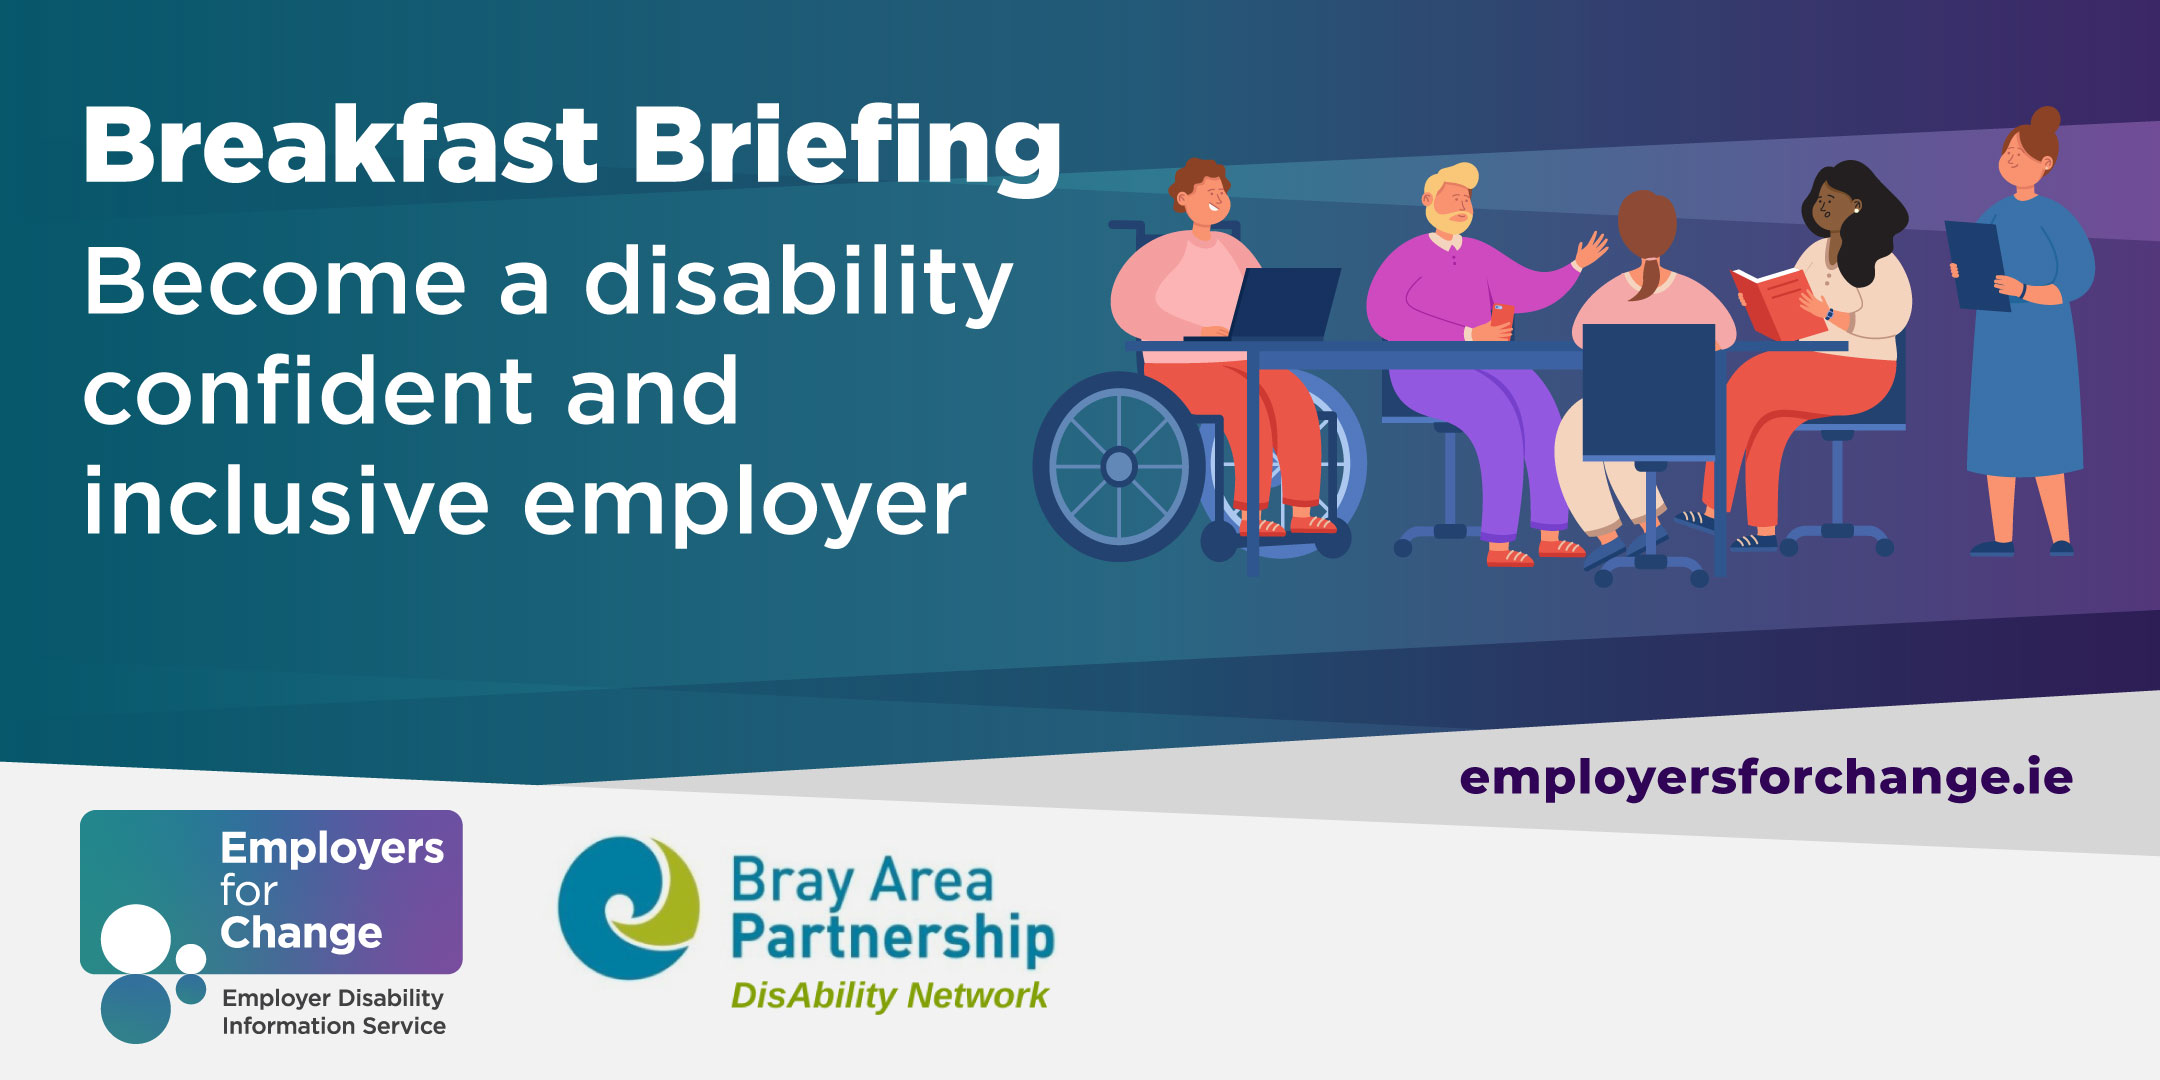 Dark turquoise and purple gradient background, illustration of a diverse group of people in an office setting, one person is a wheelchair user. Breakfast Briefing. Become a disability confident and inclusive employer. Wed 26th April 8.30 - 10am. Glenview Hotel, Glen of the Downs. Logos for Employers for Change (Funded by DCEDIY) and Bray Area Partnership DisAbility Network. Employersforchange.ie